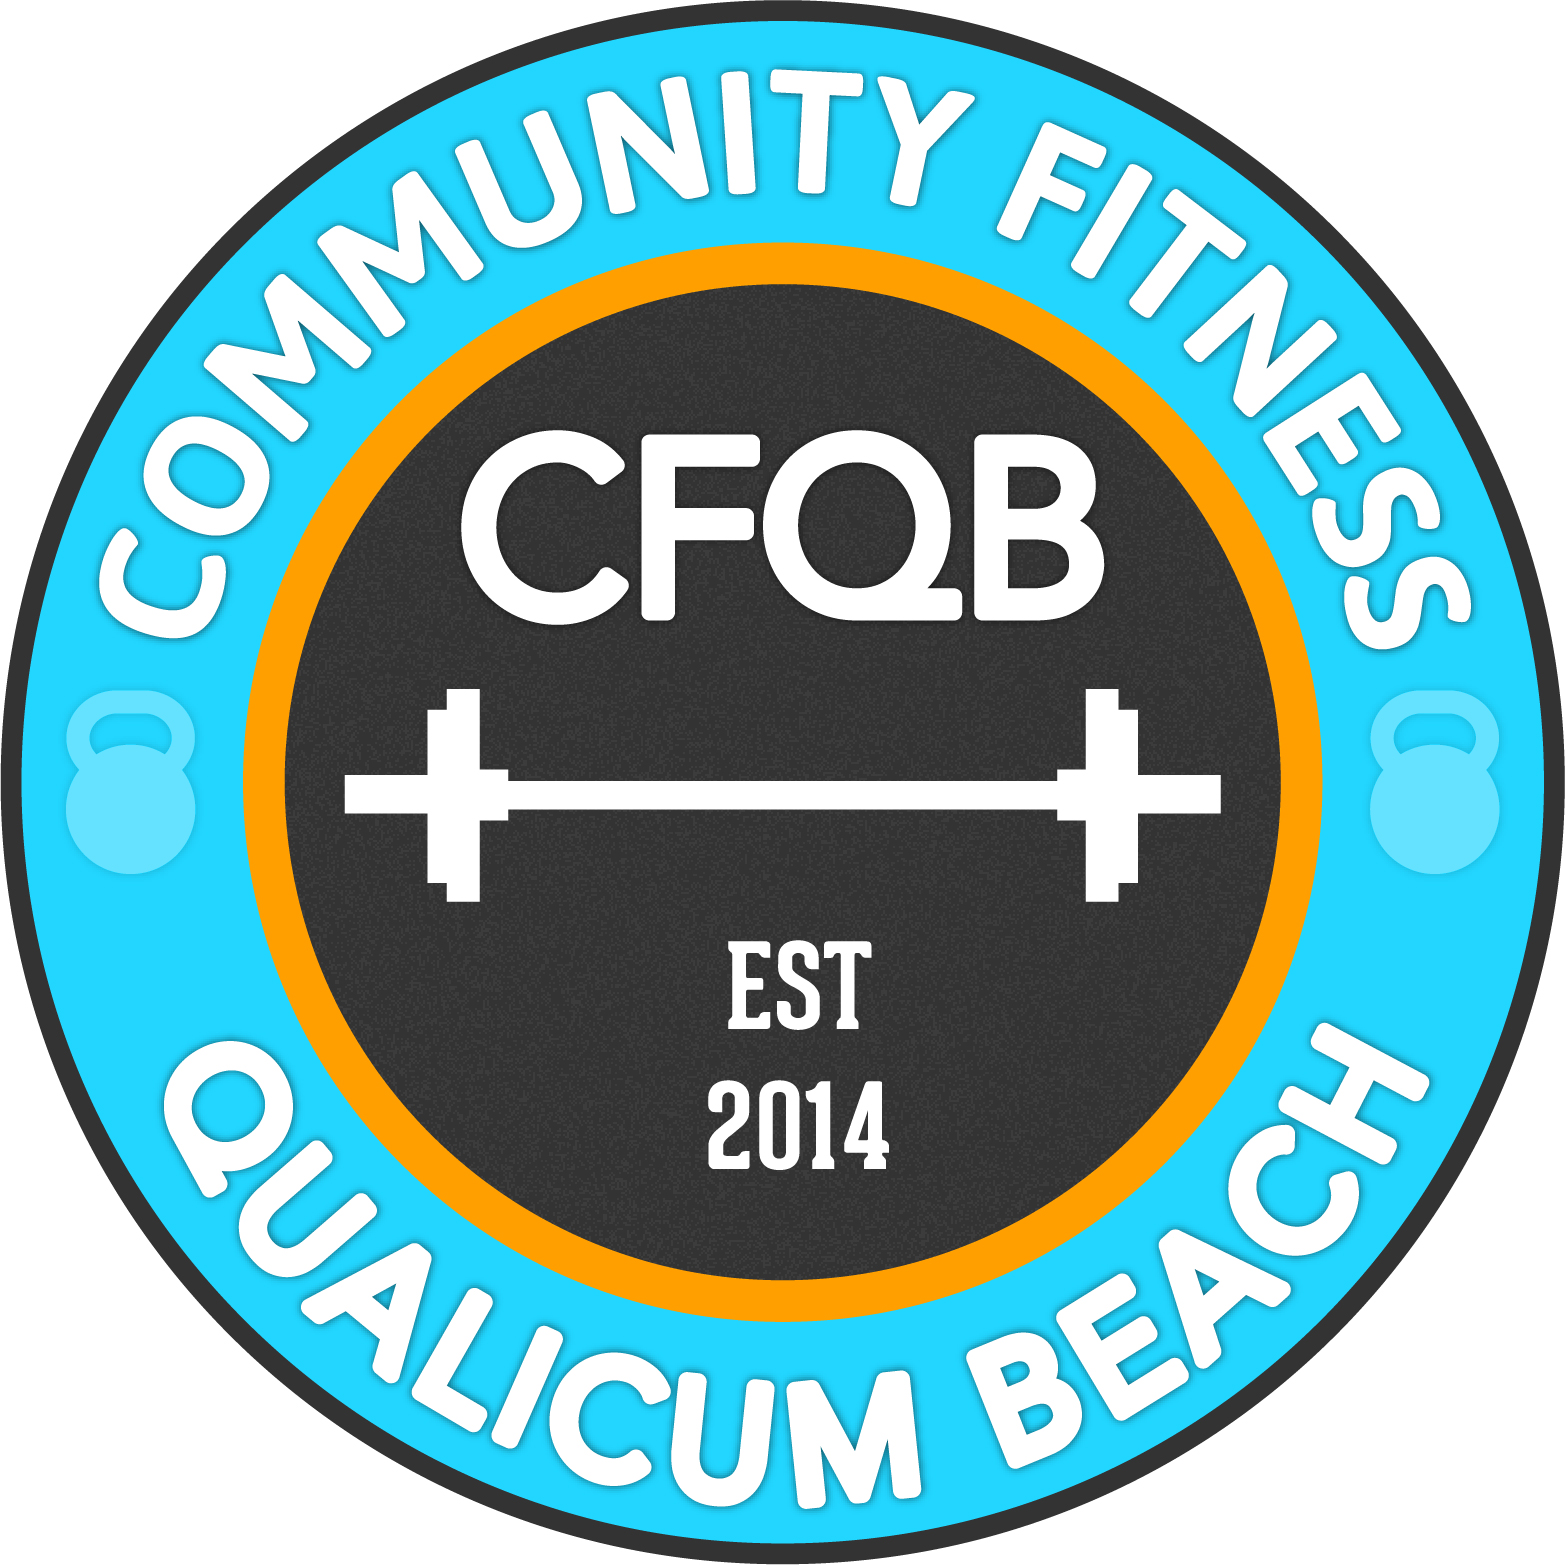 Welcome to Community Fitness QB